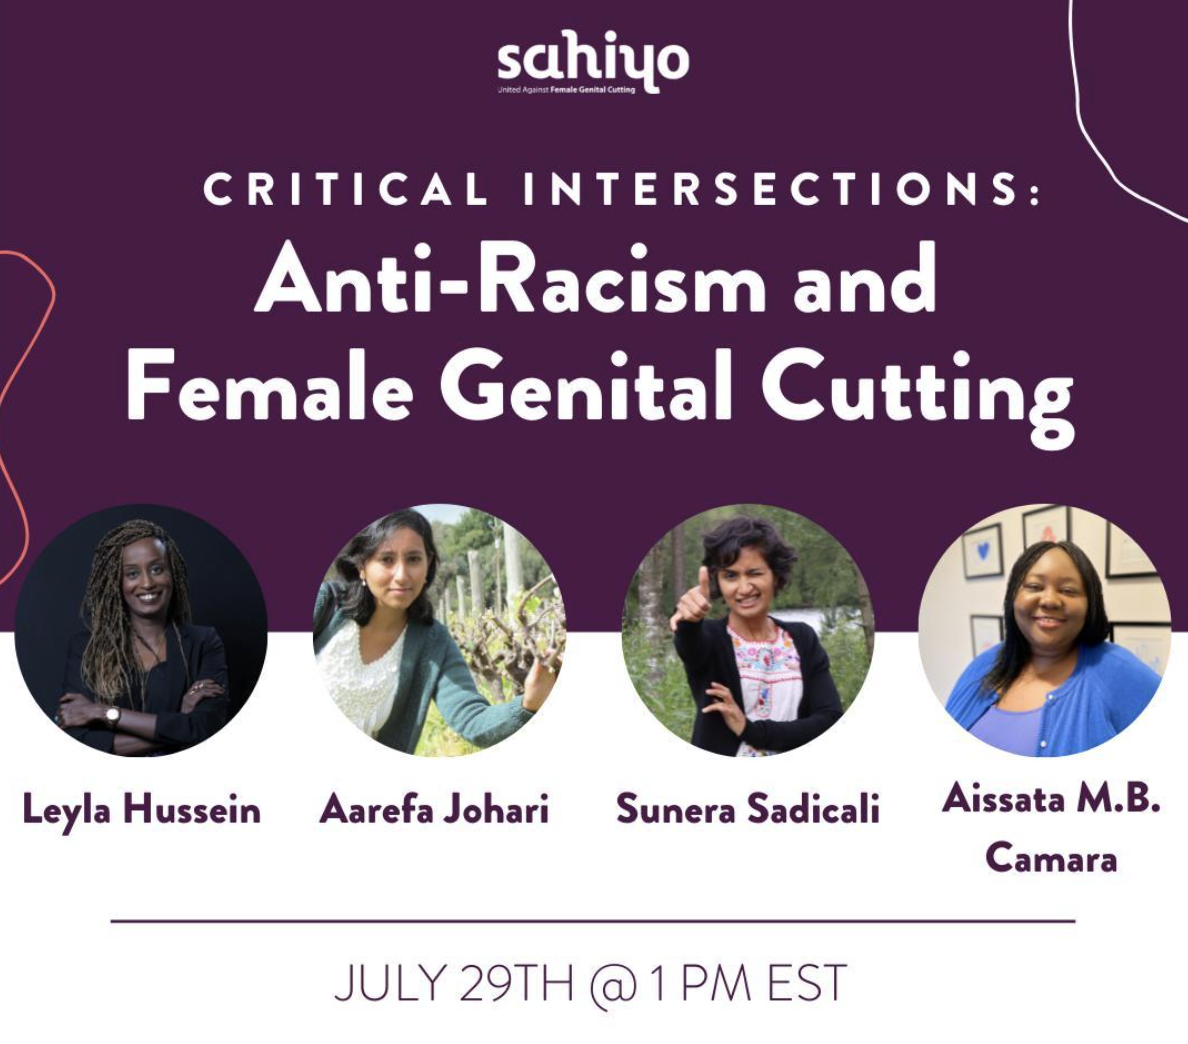 Addressing Critical Intersections: Anti-Racism and Female Genital Cutting